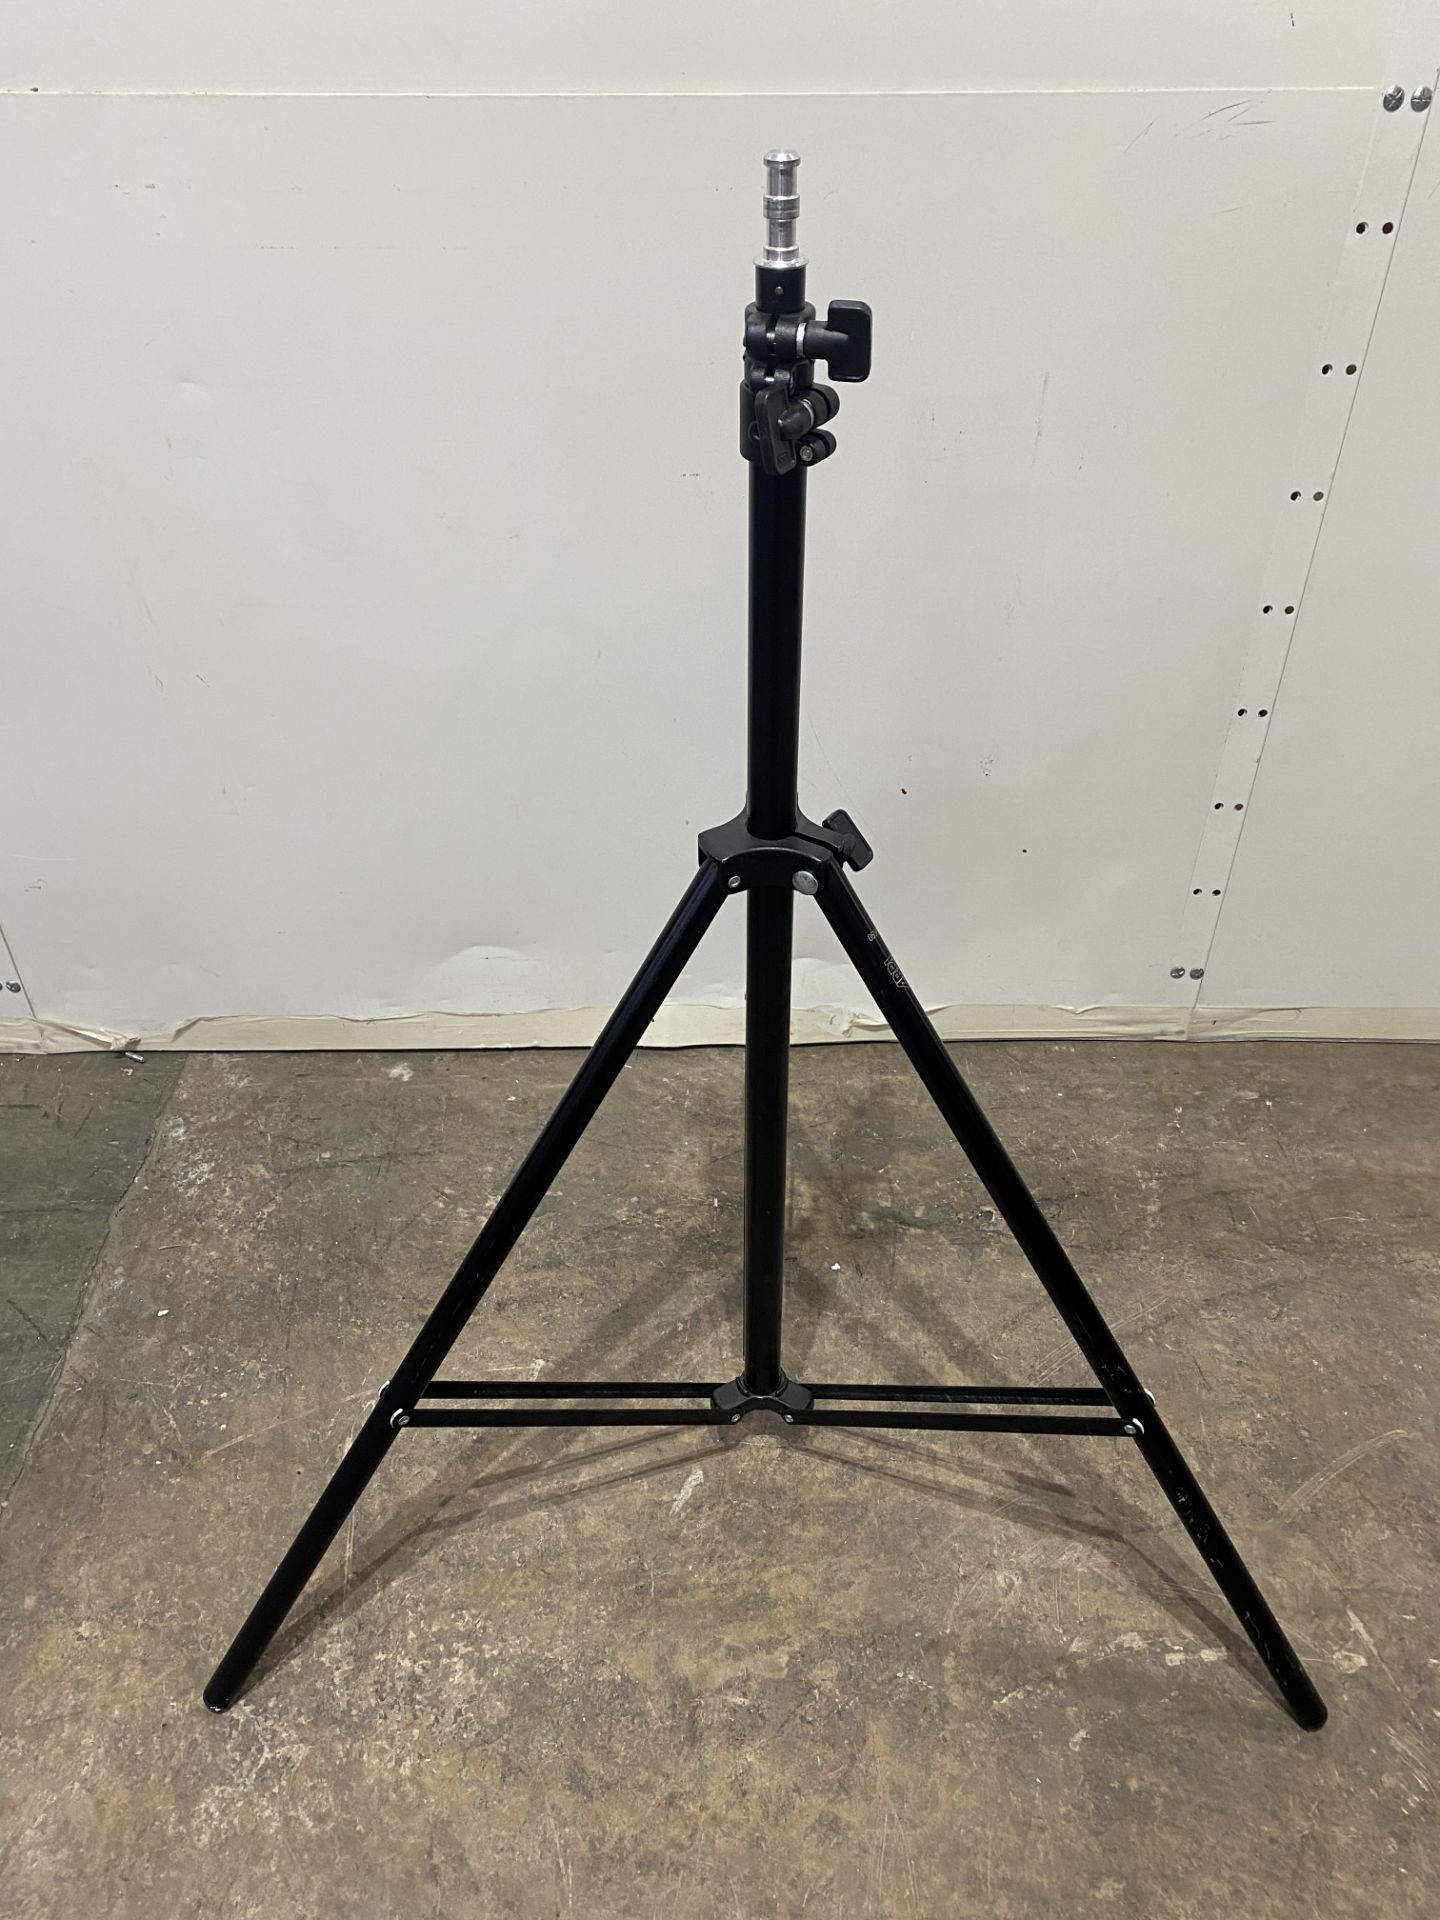 2 x Arri 050A Portable Lighting Stands/Tripods - Image 4 of 7